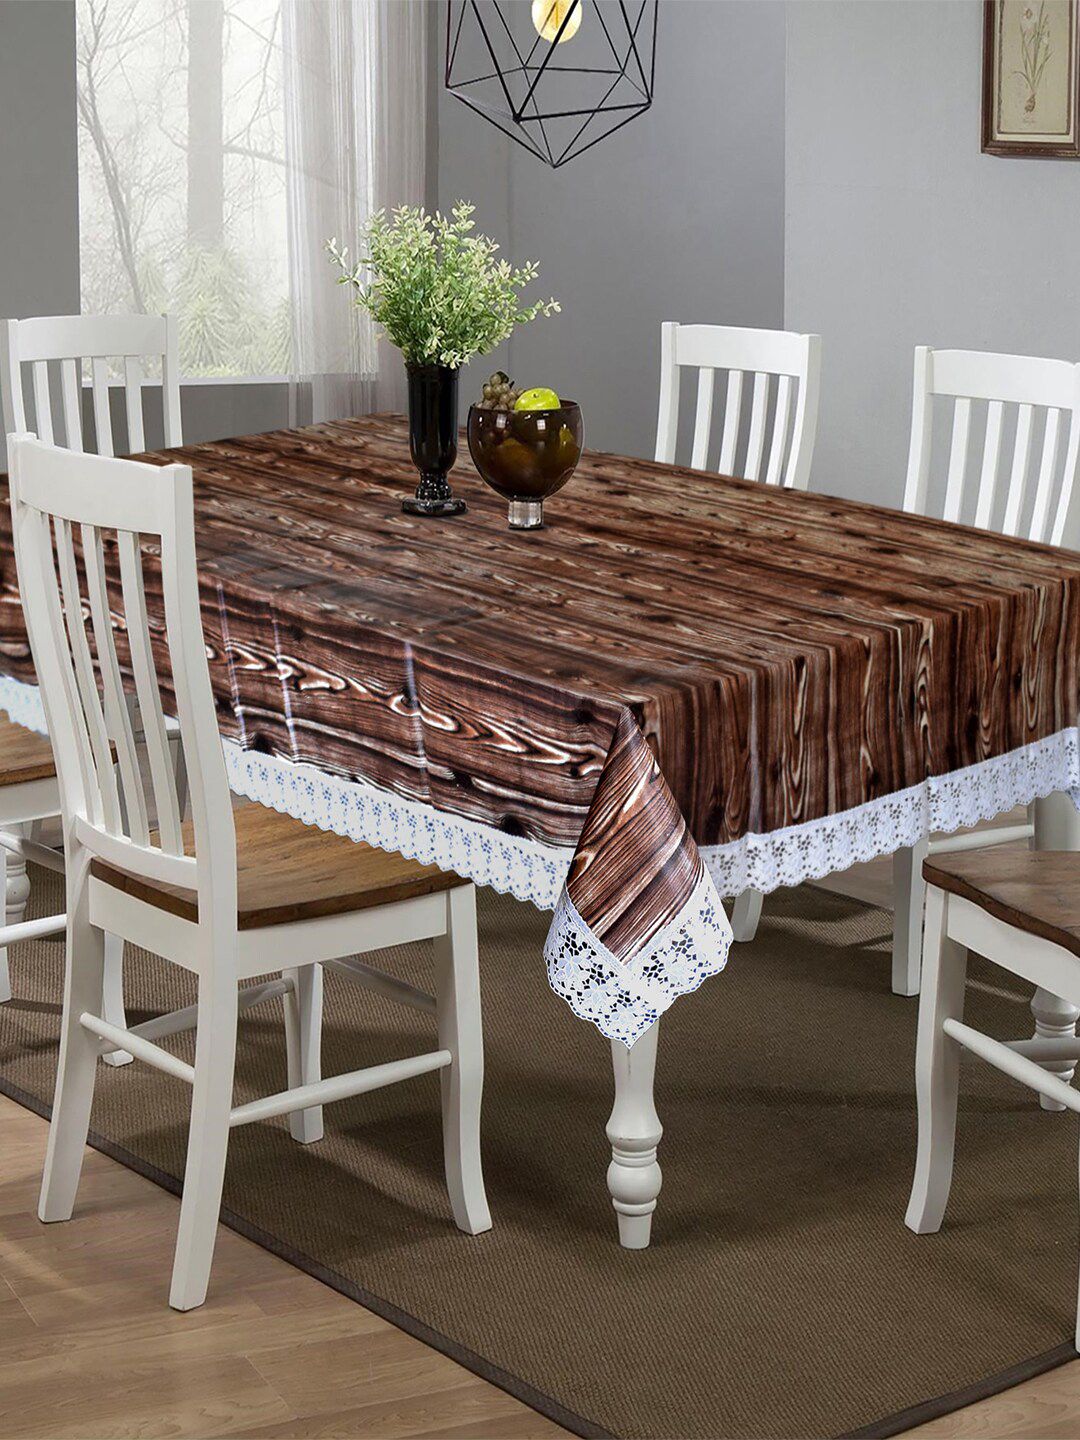 Kuber Industries Brown Printed Rectangle Table Covers Price in India